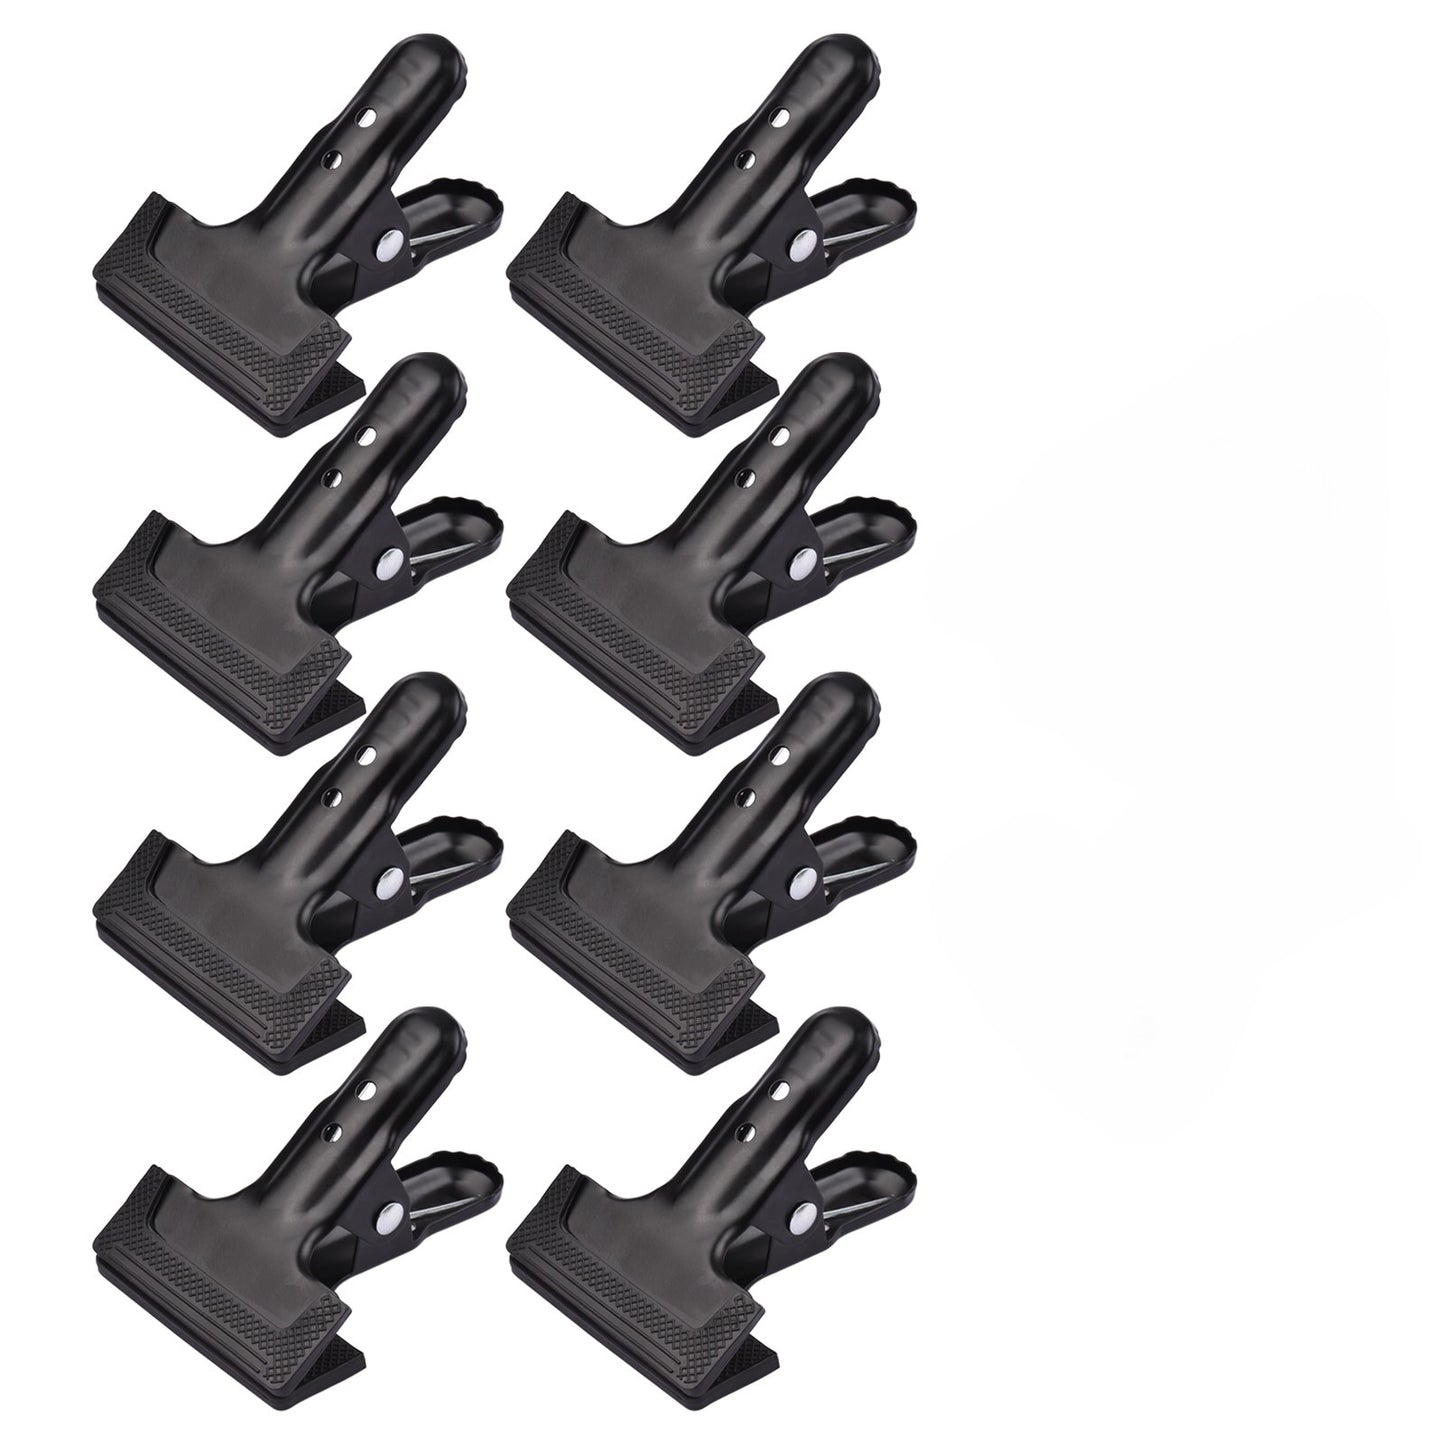 Up to 10Pcs HRIDZ Heavy Duty Spring Metal Clip Photography Backdrop Clamps with Rubber Pad